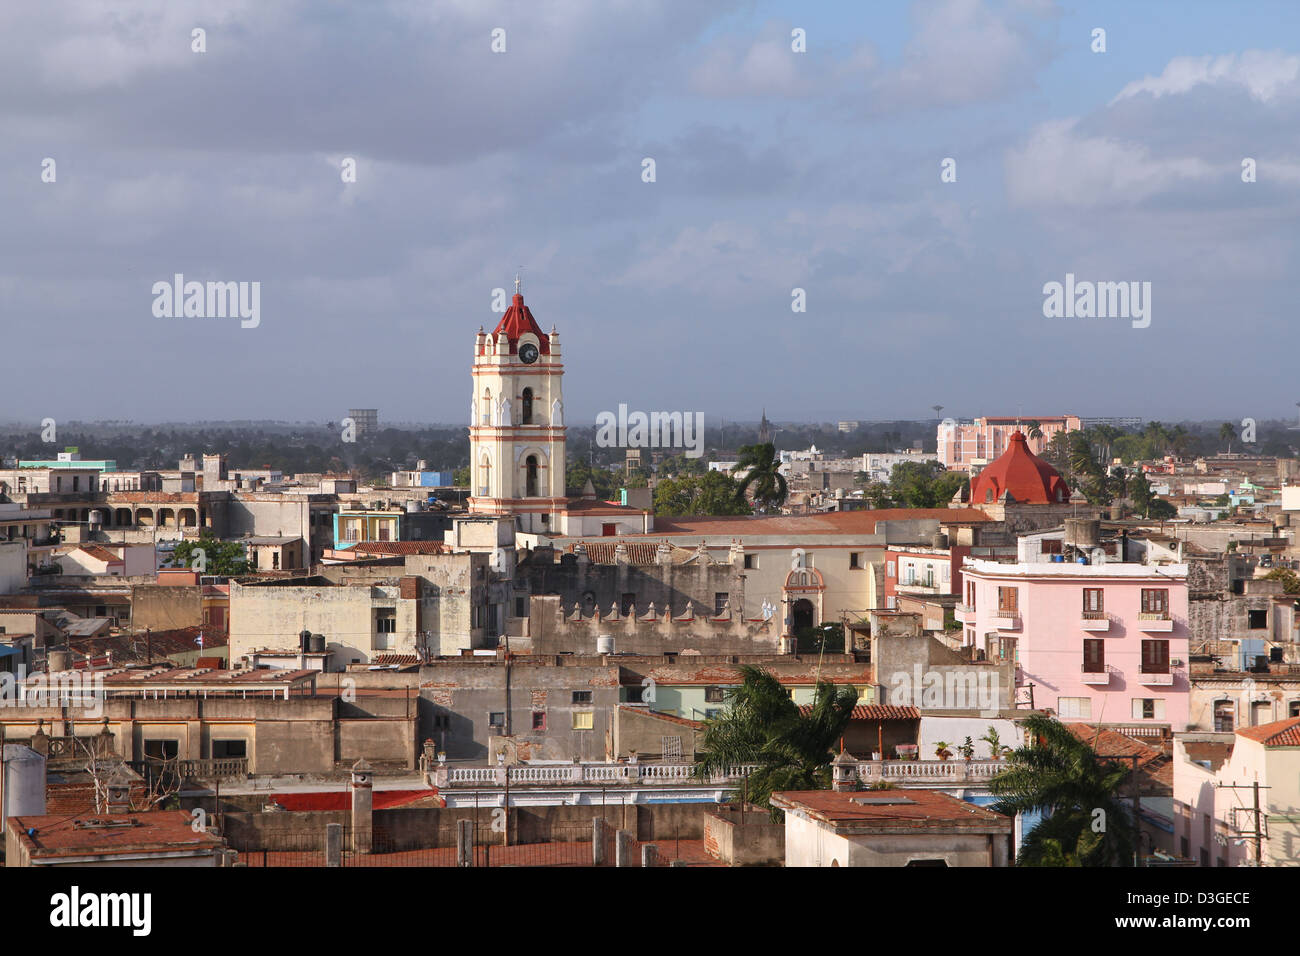 Camaguey, Cuba - old town listed on UNESCO World Heritage List. Aerial view. Stock Photo